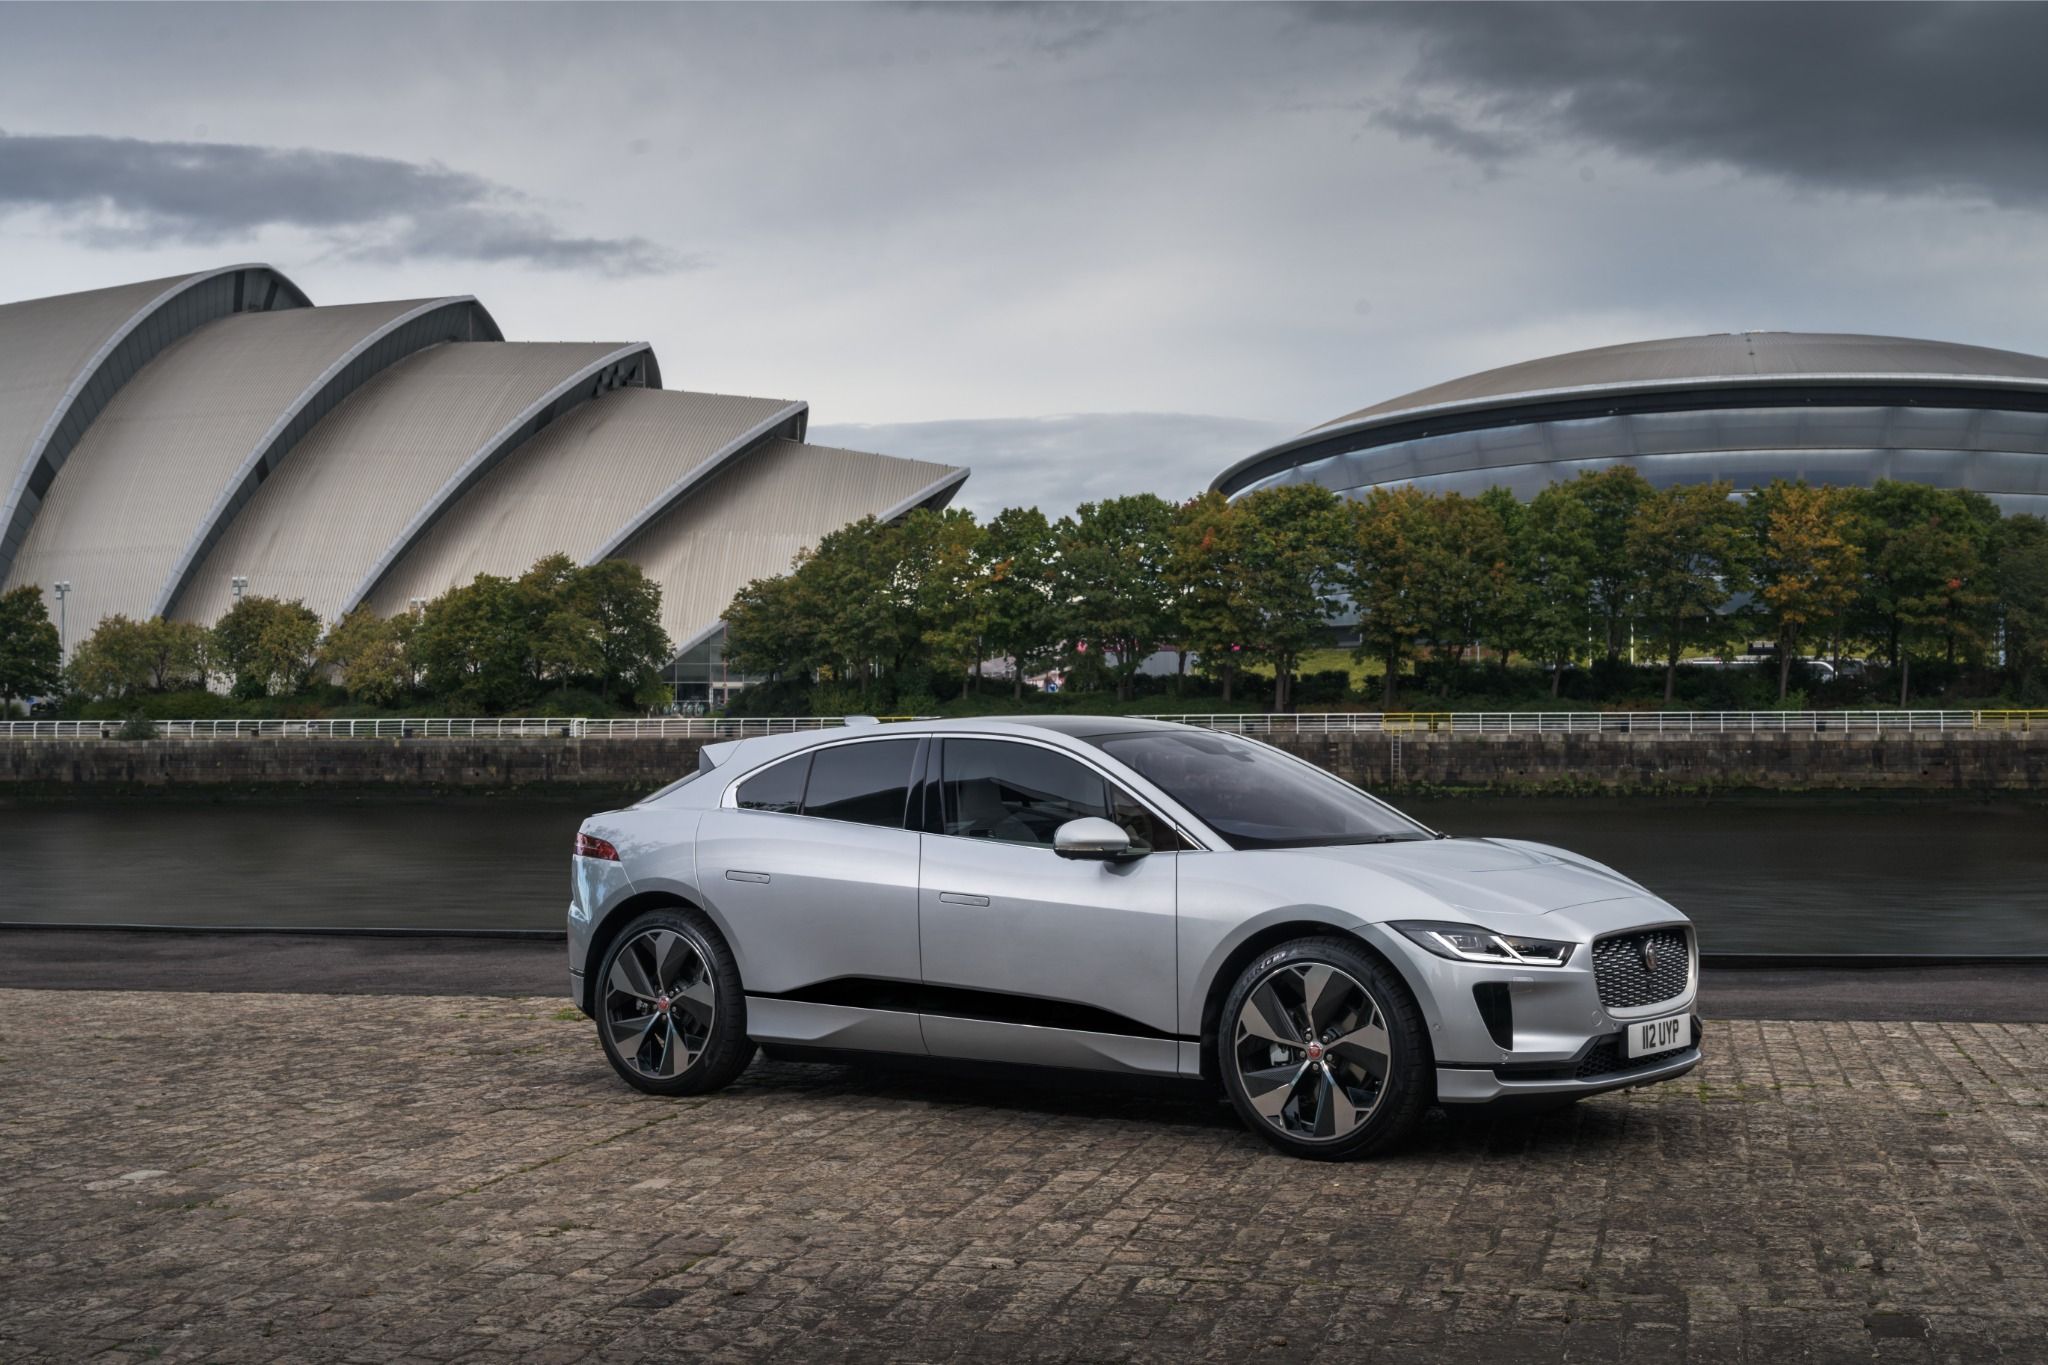 Review of the Jaguar I-Pace